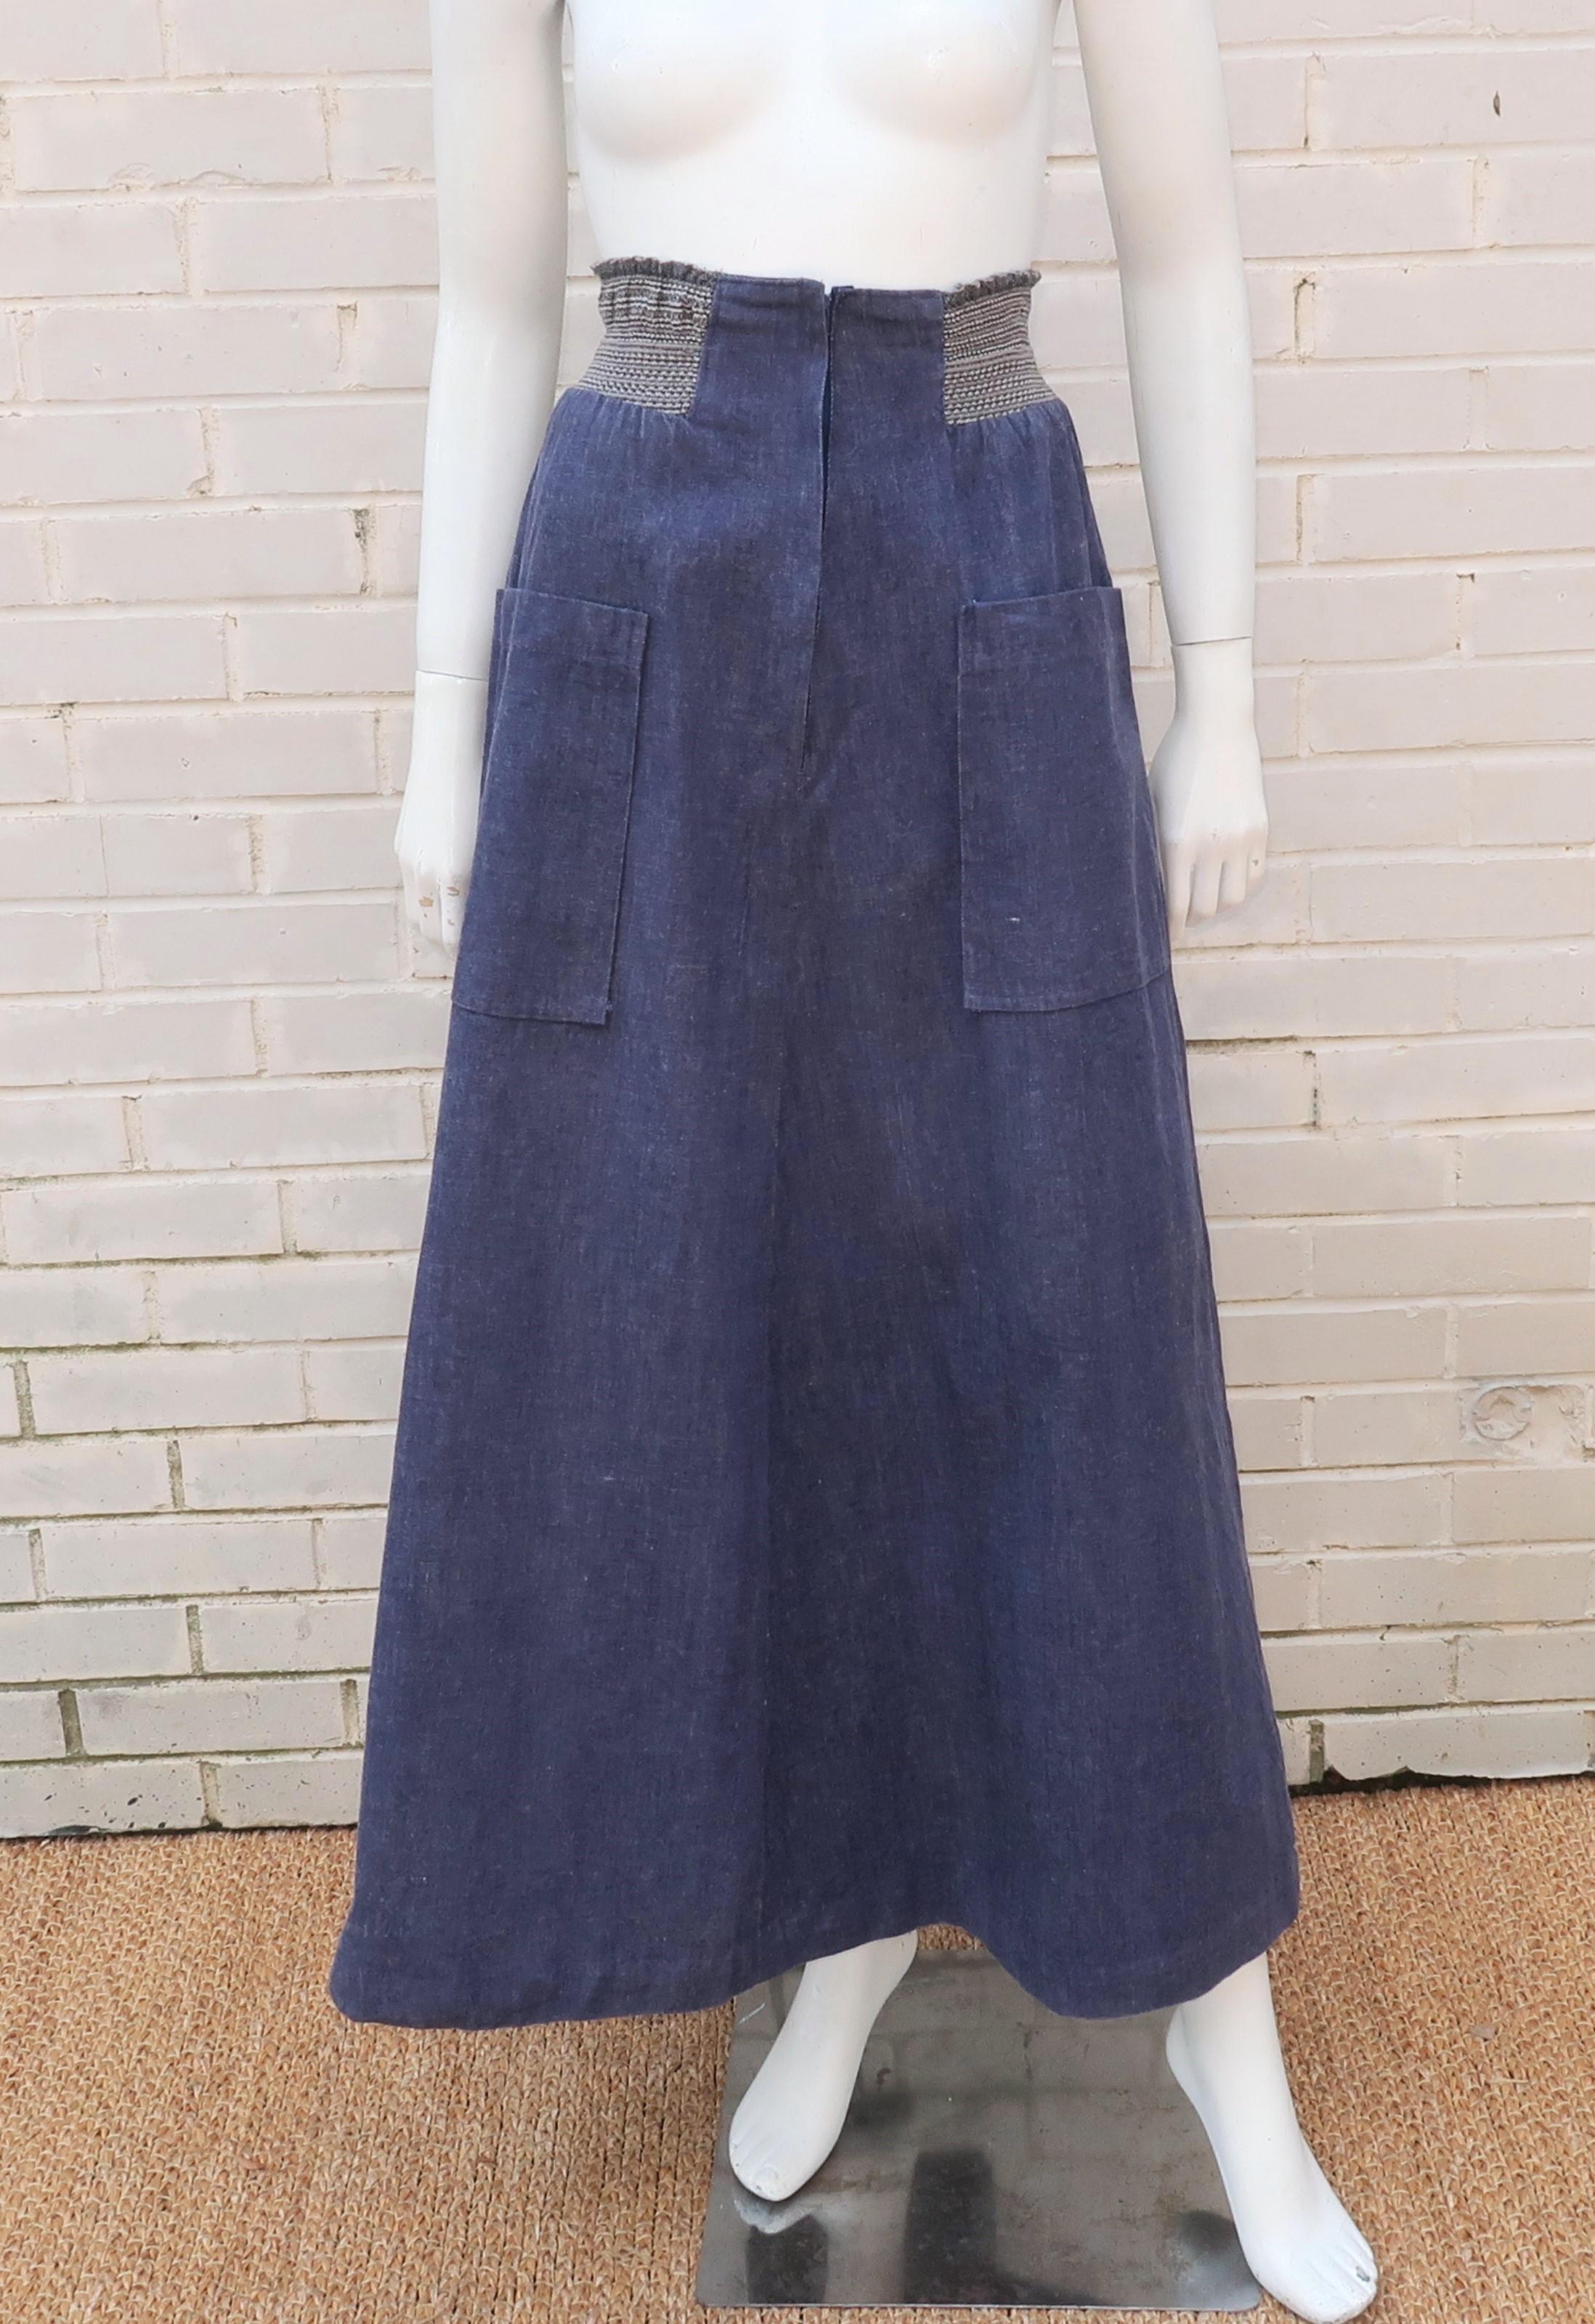 A boho chic 1970’s denim maxi skirt by English designer, David Silverman.  The skirt features an elasticized ribbed high waistband and extra large front pockets.  It zips and hooks at the front with an a-line silhouette that would be period perfect